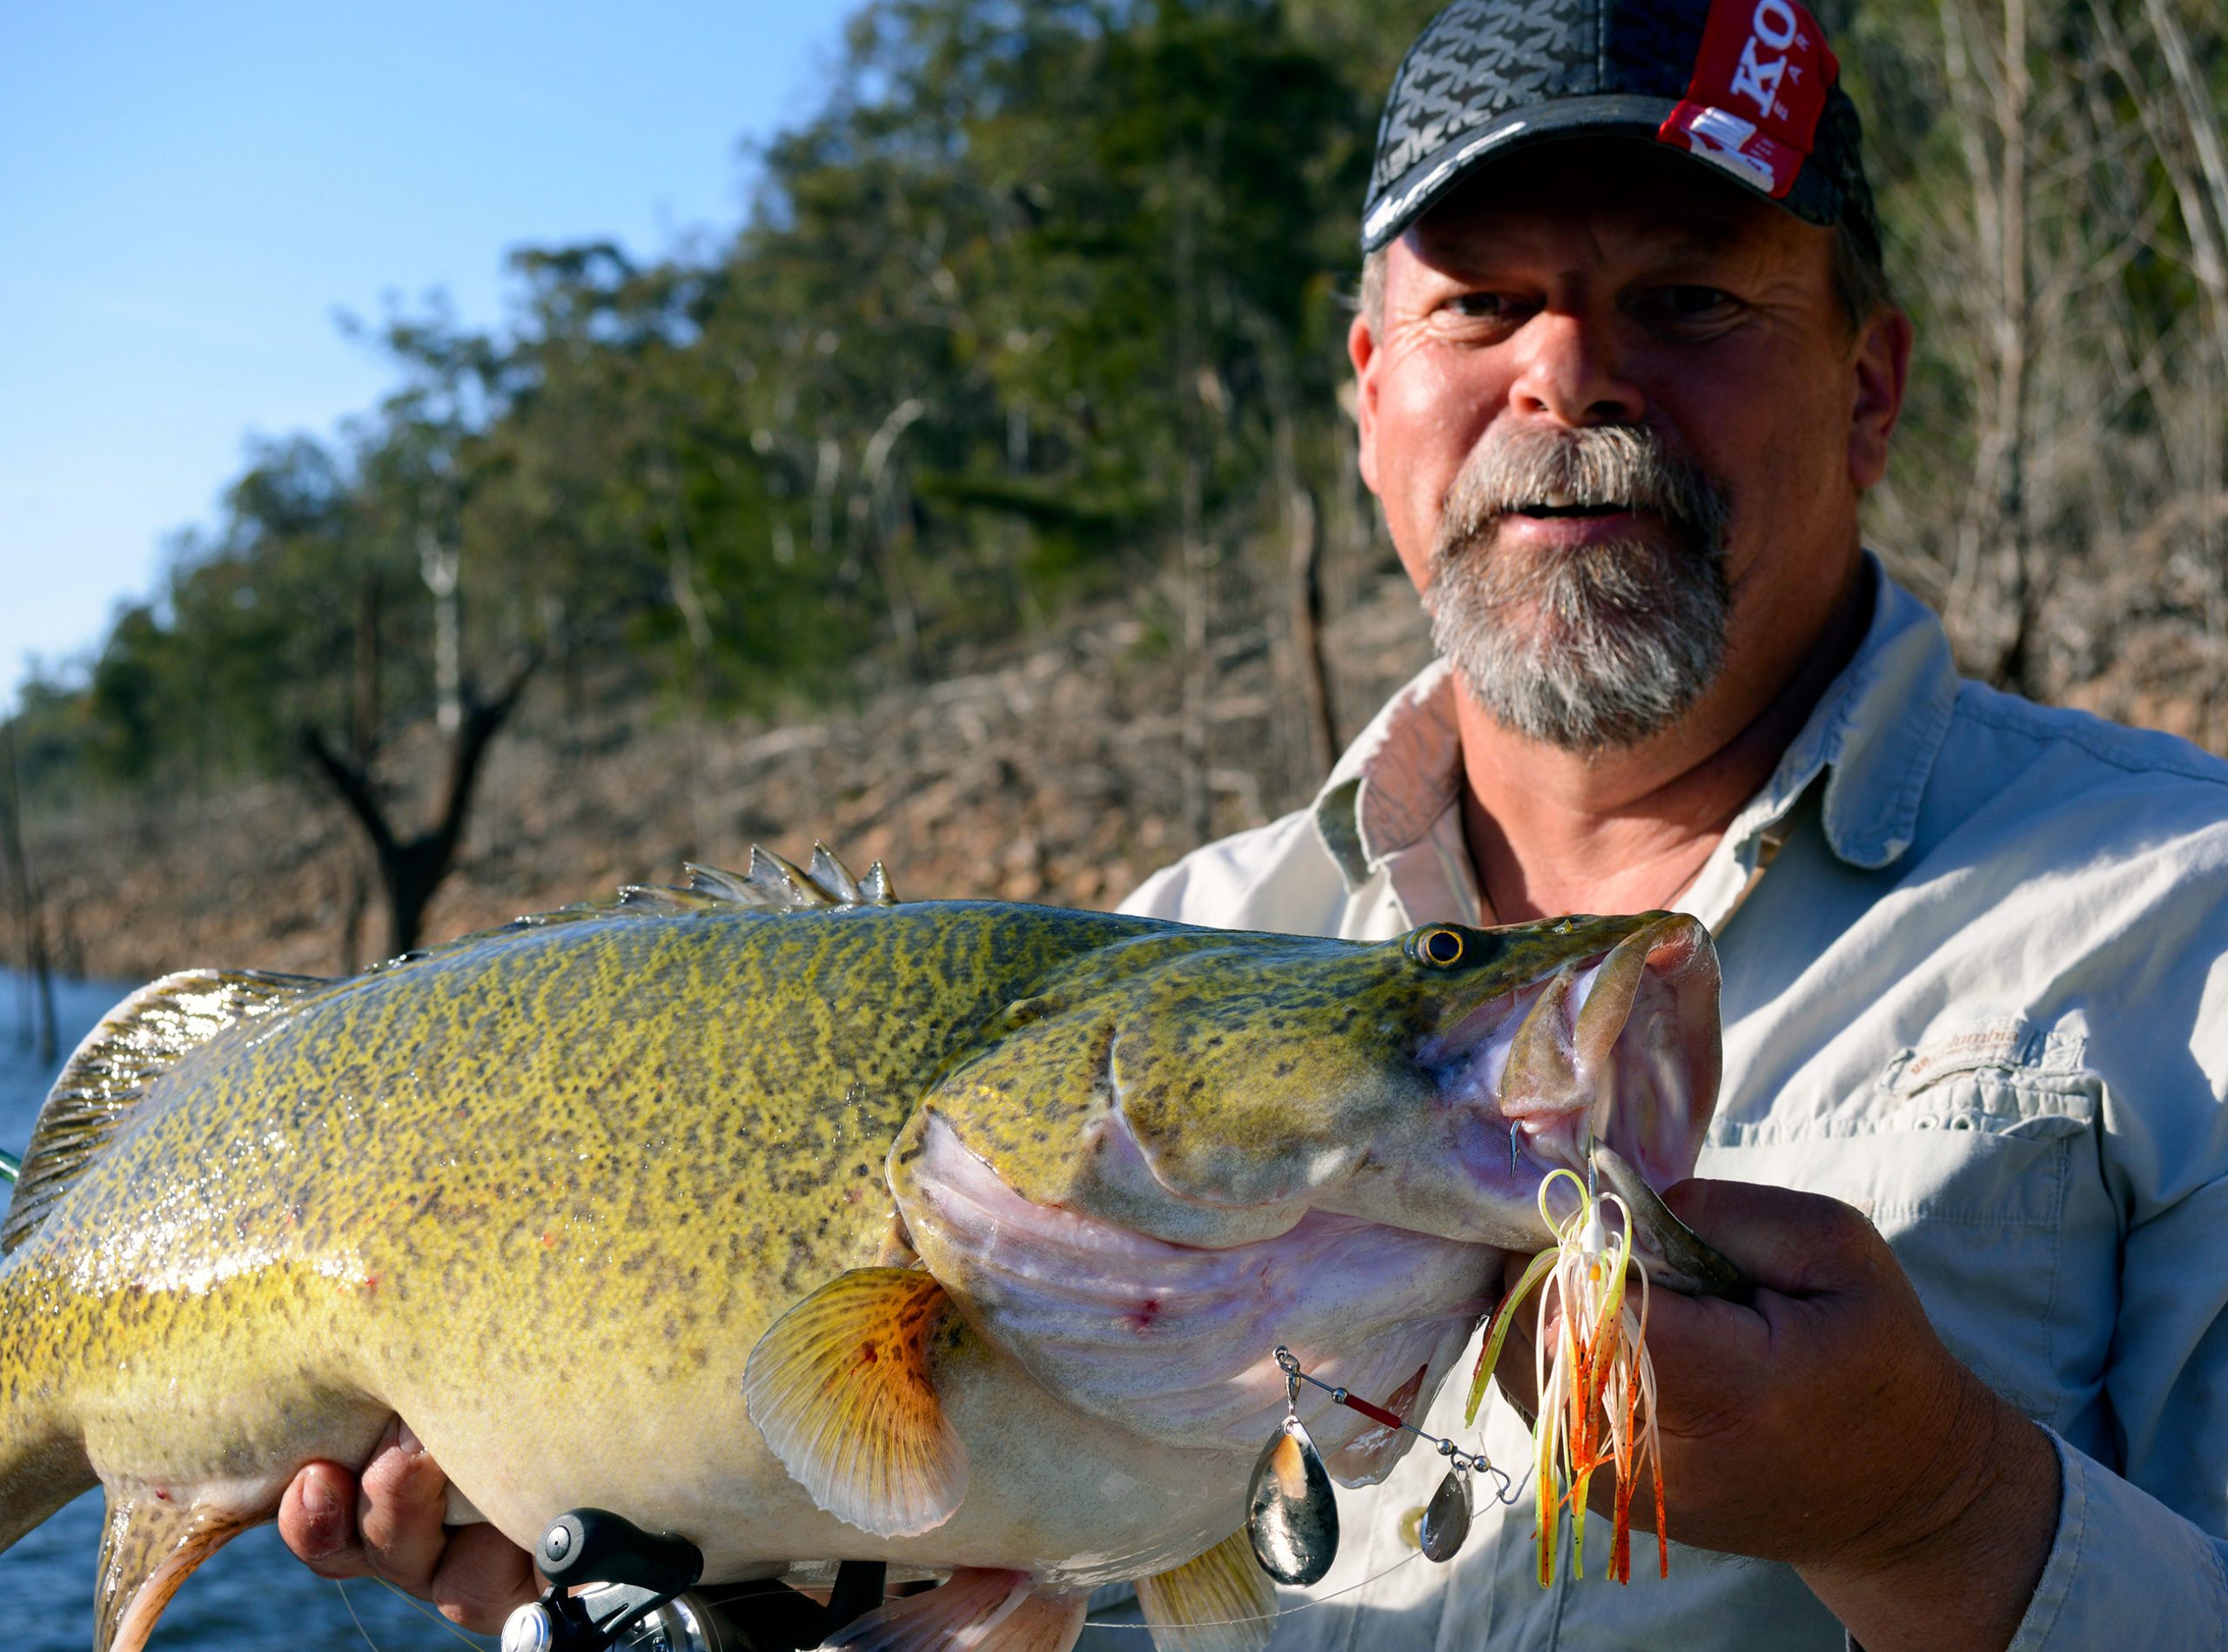 Spinnerbaits are great tools for targeting Burrinjuck cod. They'll catch yellowbelly as well.